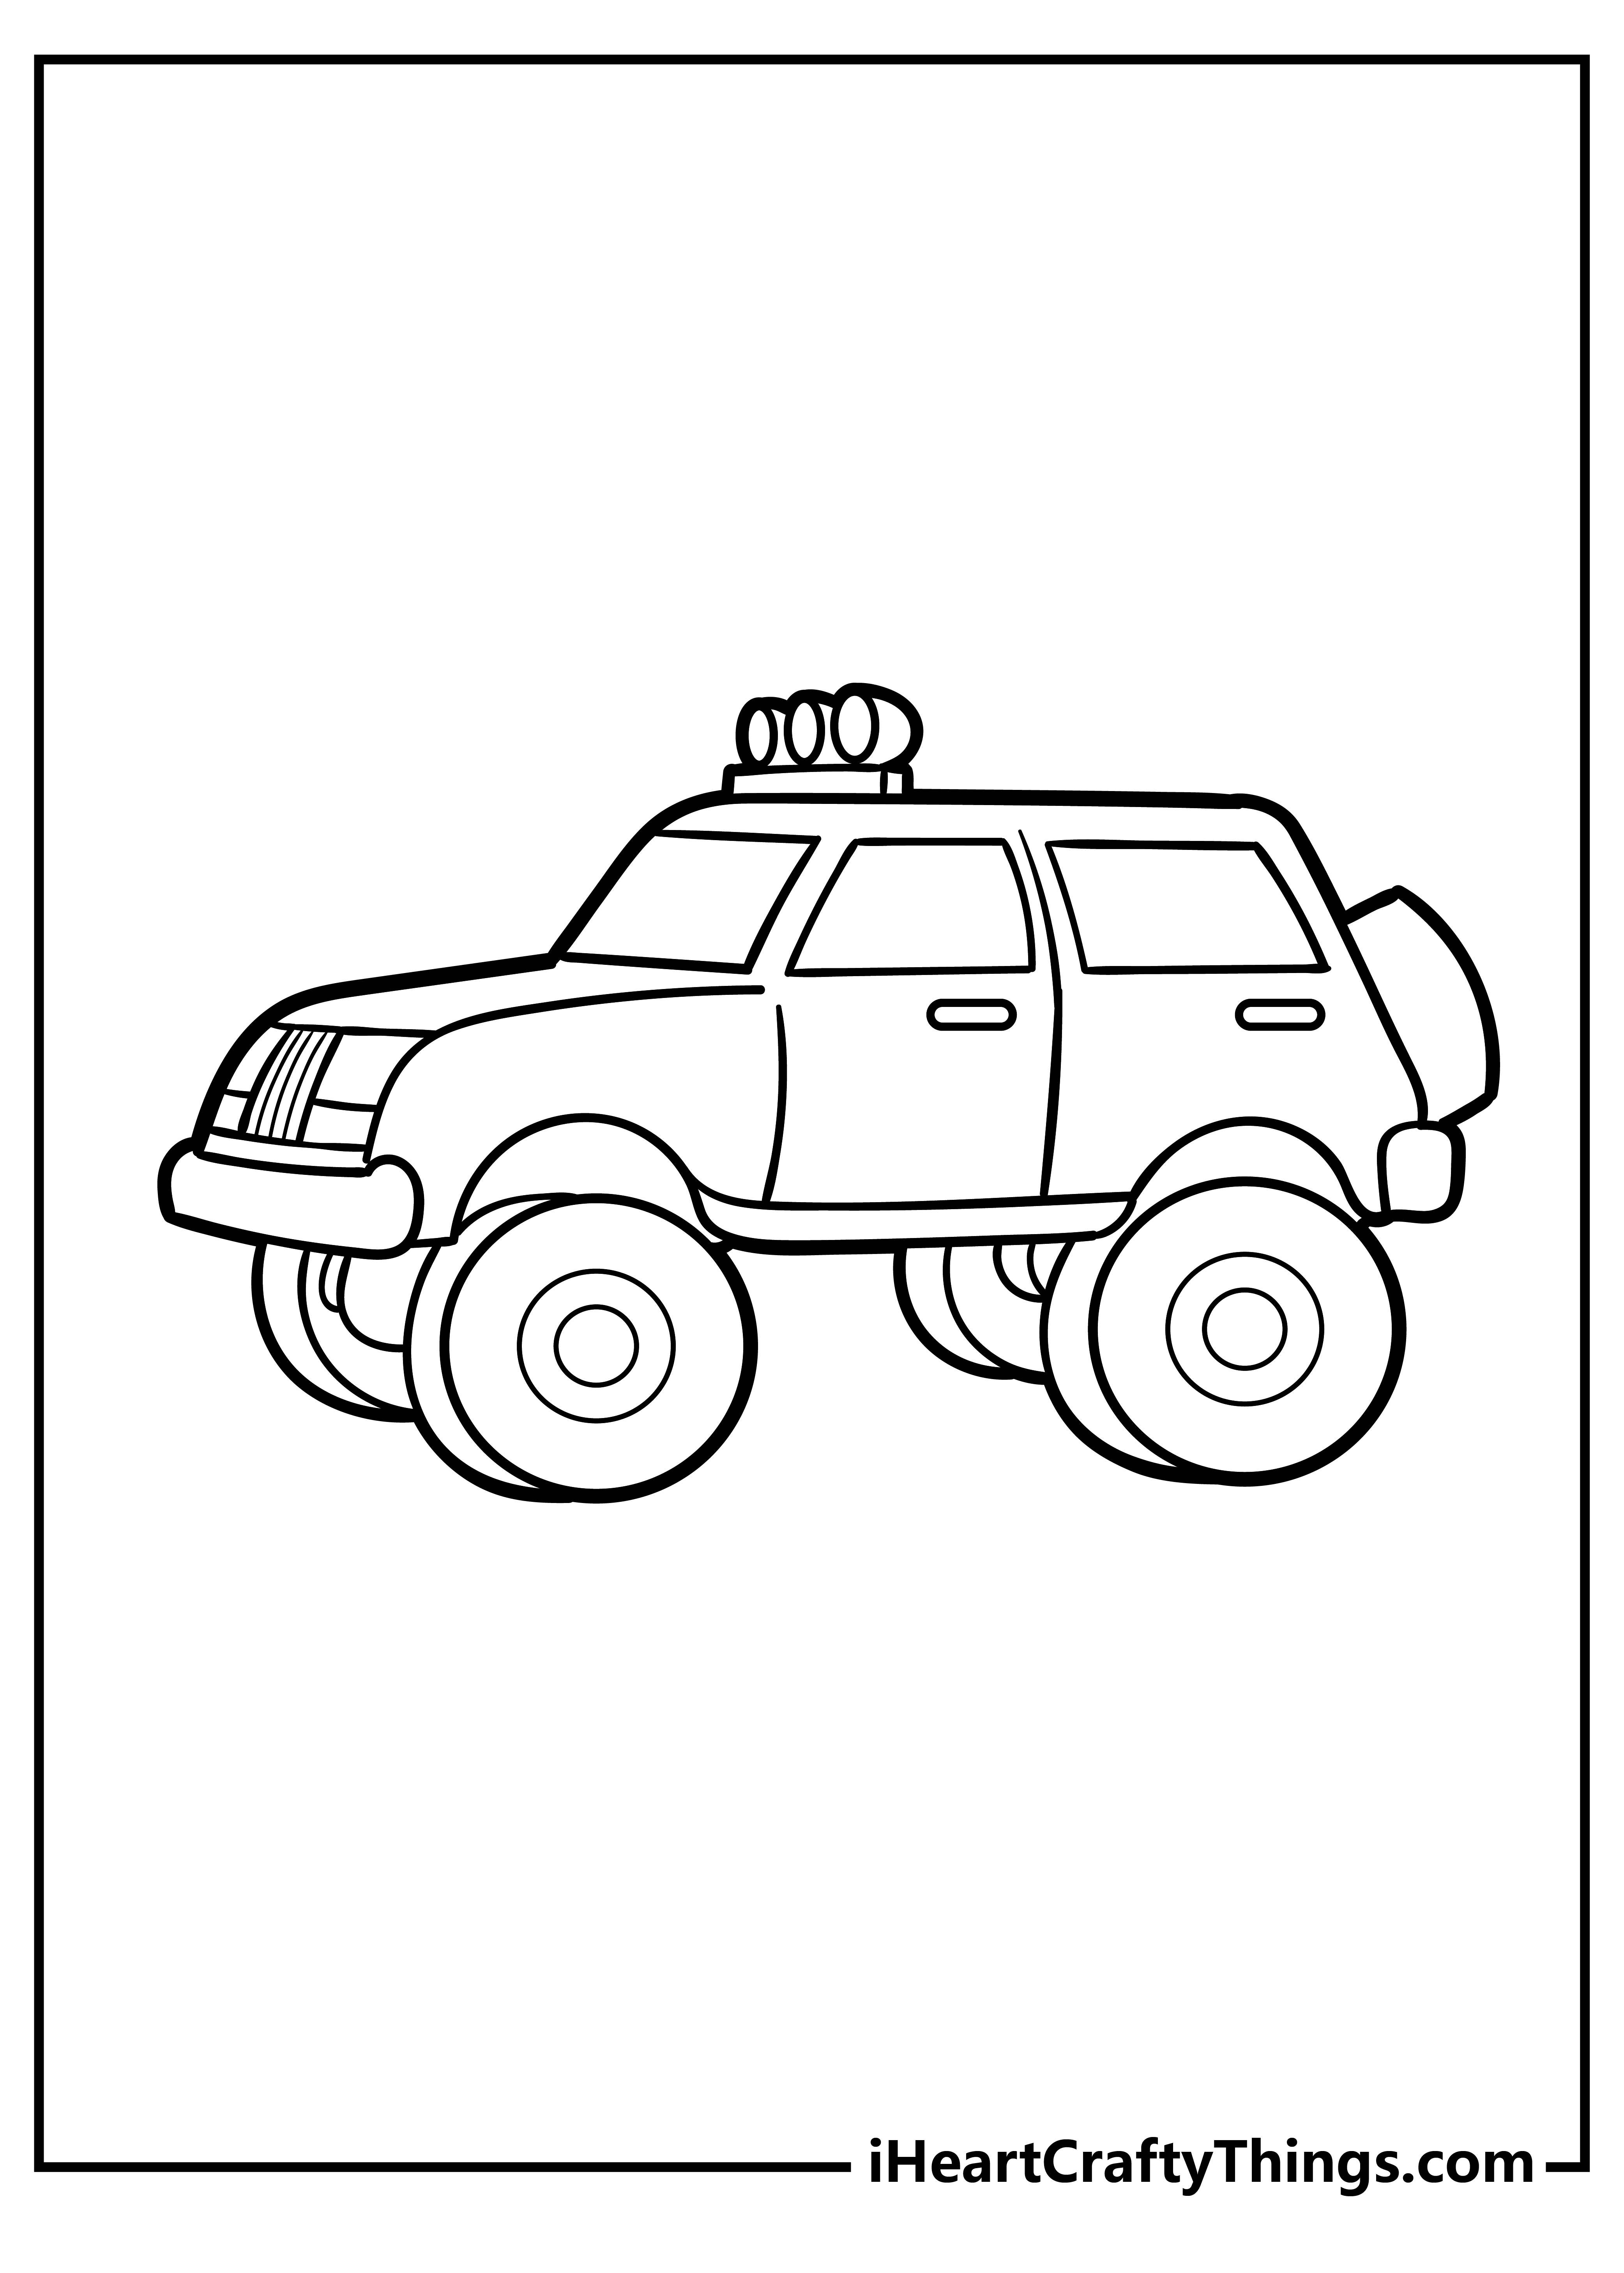 Monster Truck Coloring Pages free pdf download